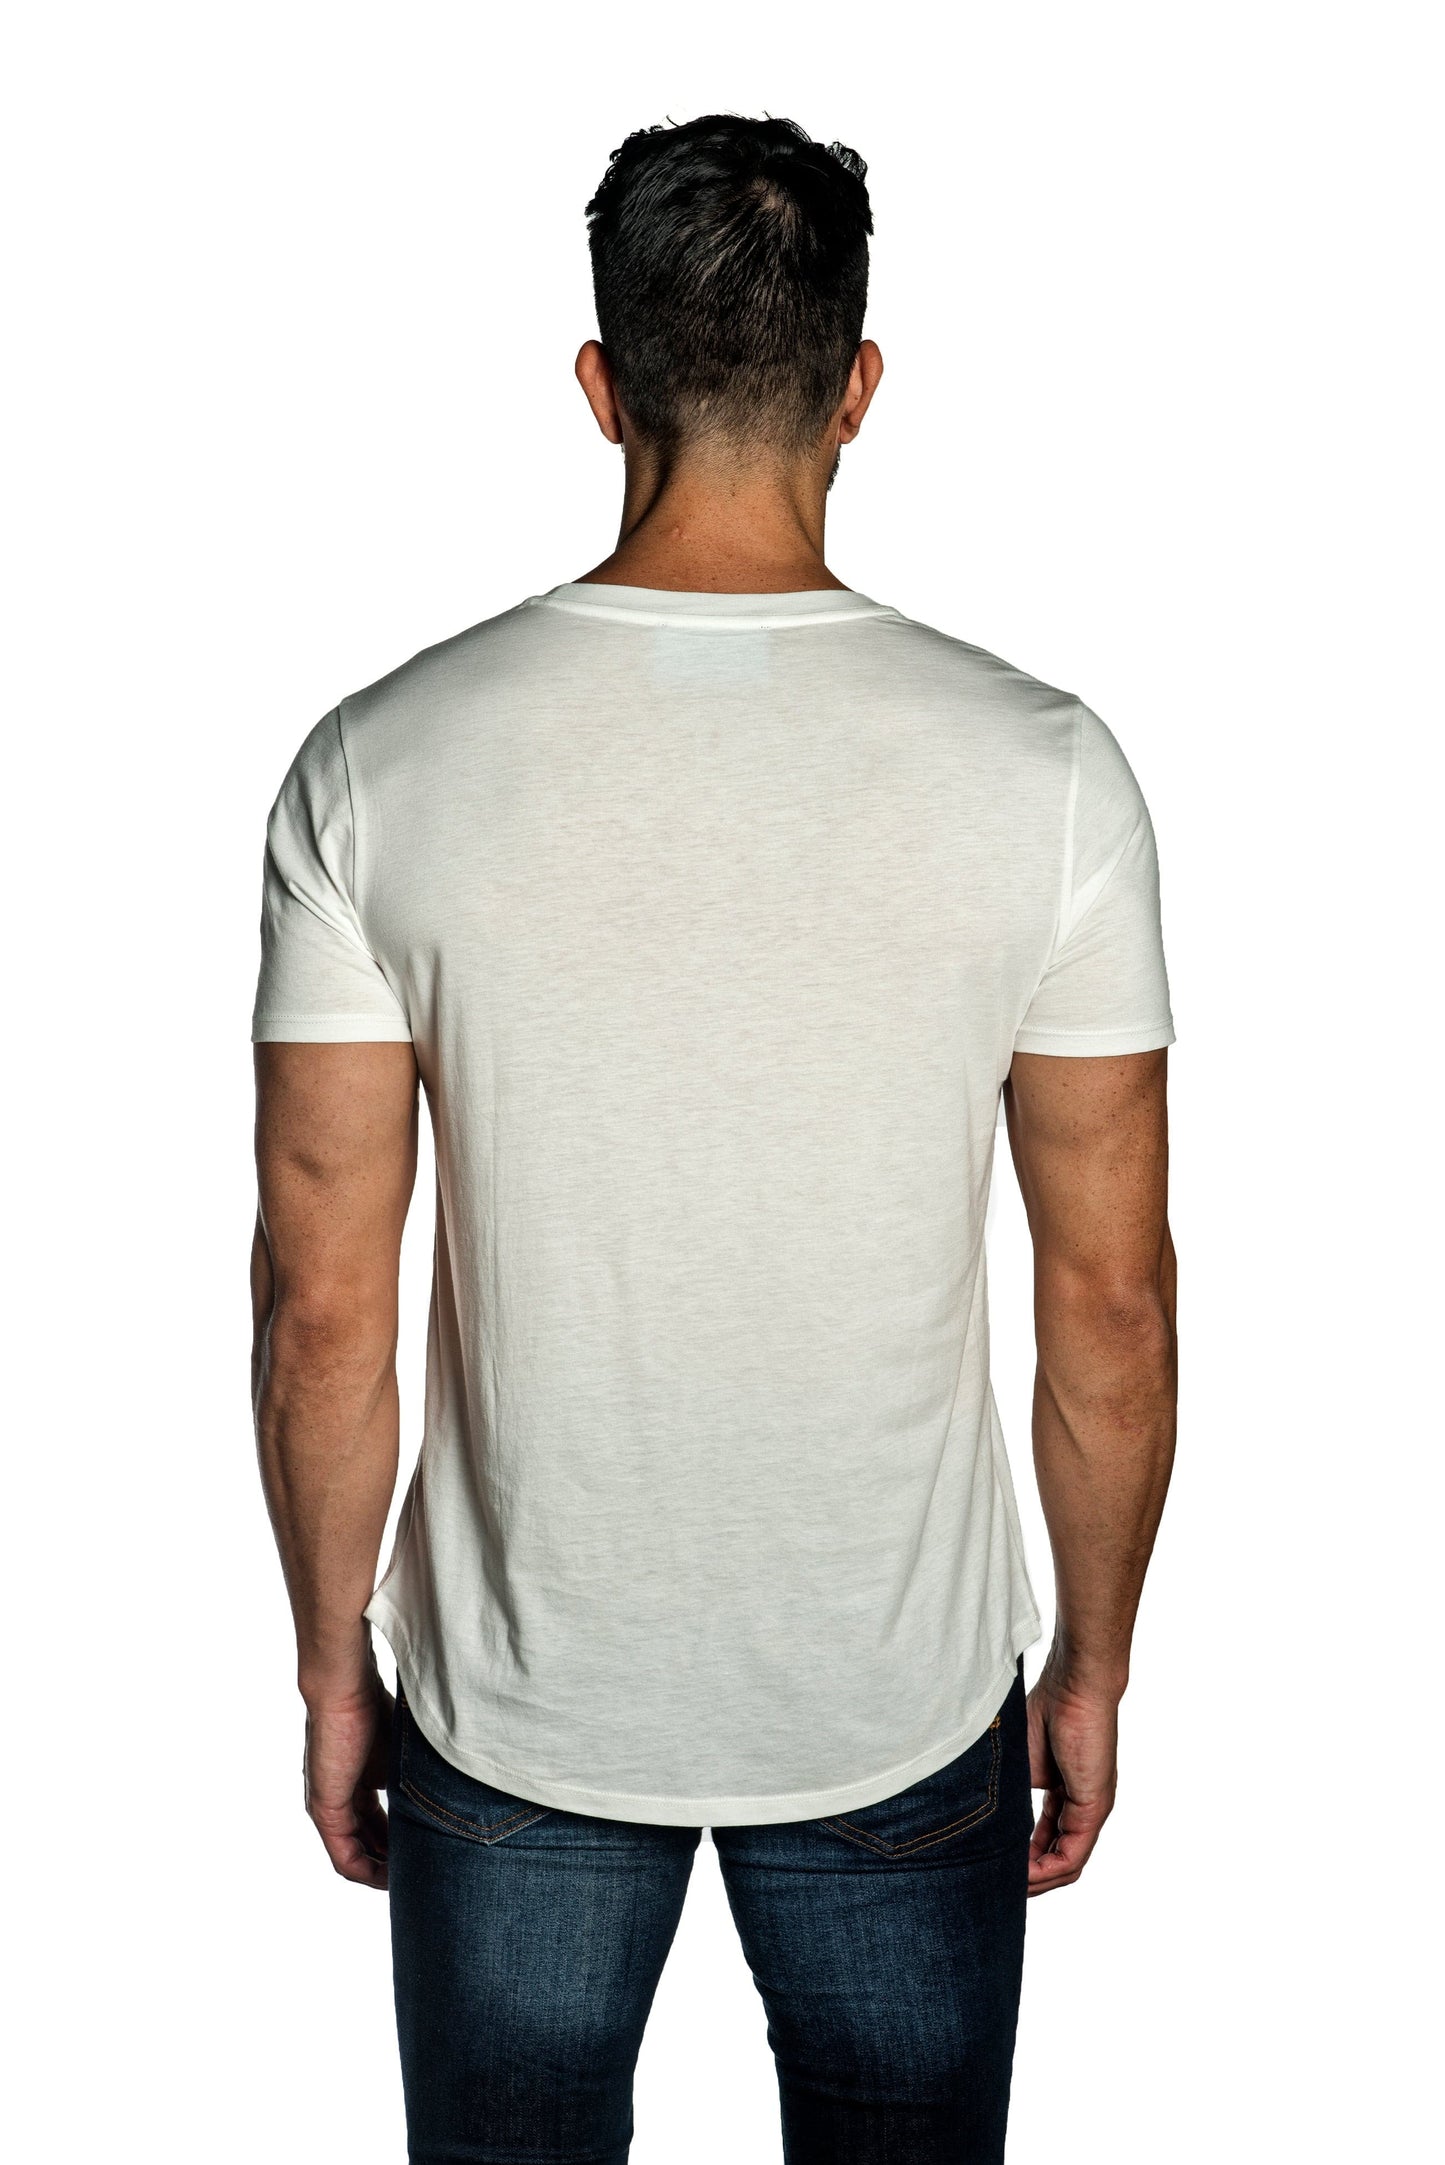 White Mens Tee With Lightning Embroidery TEE-37.